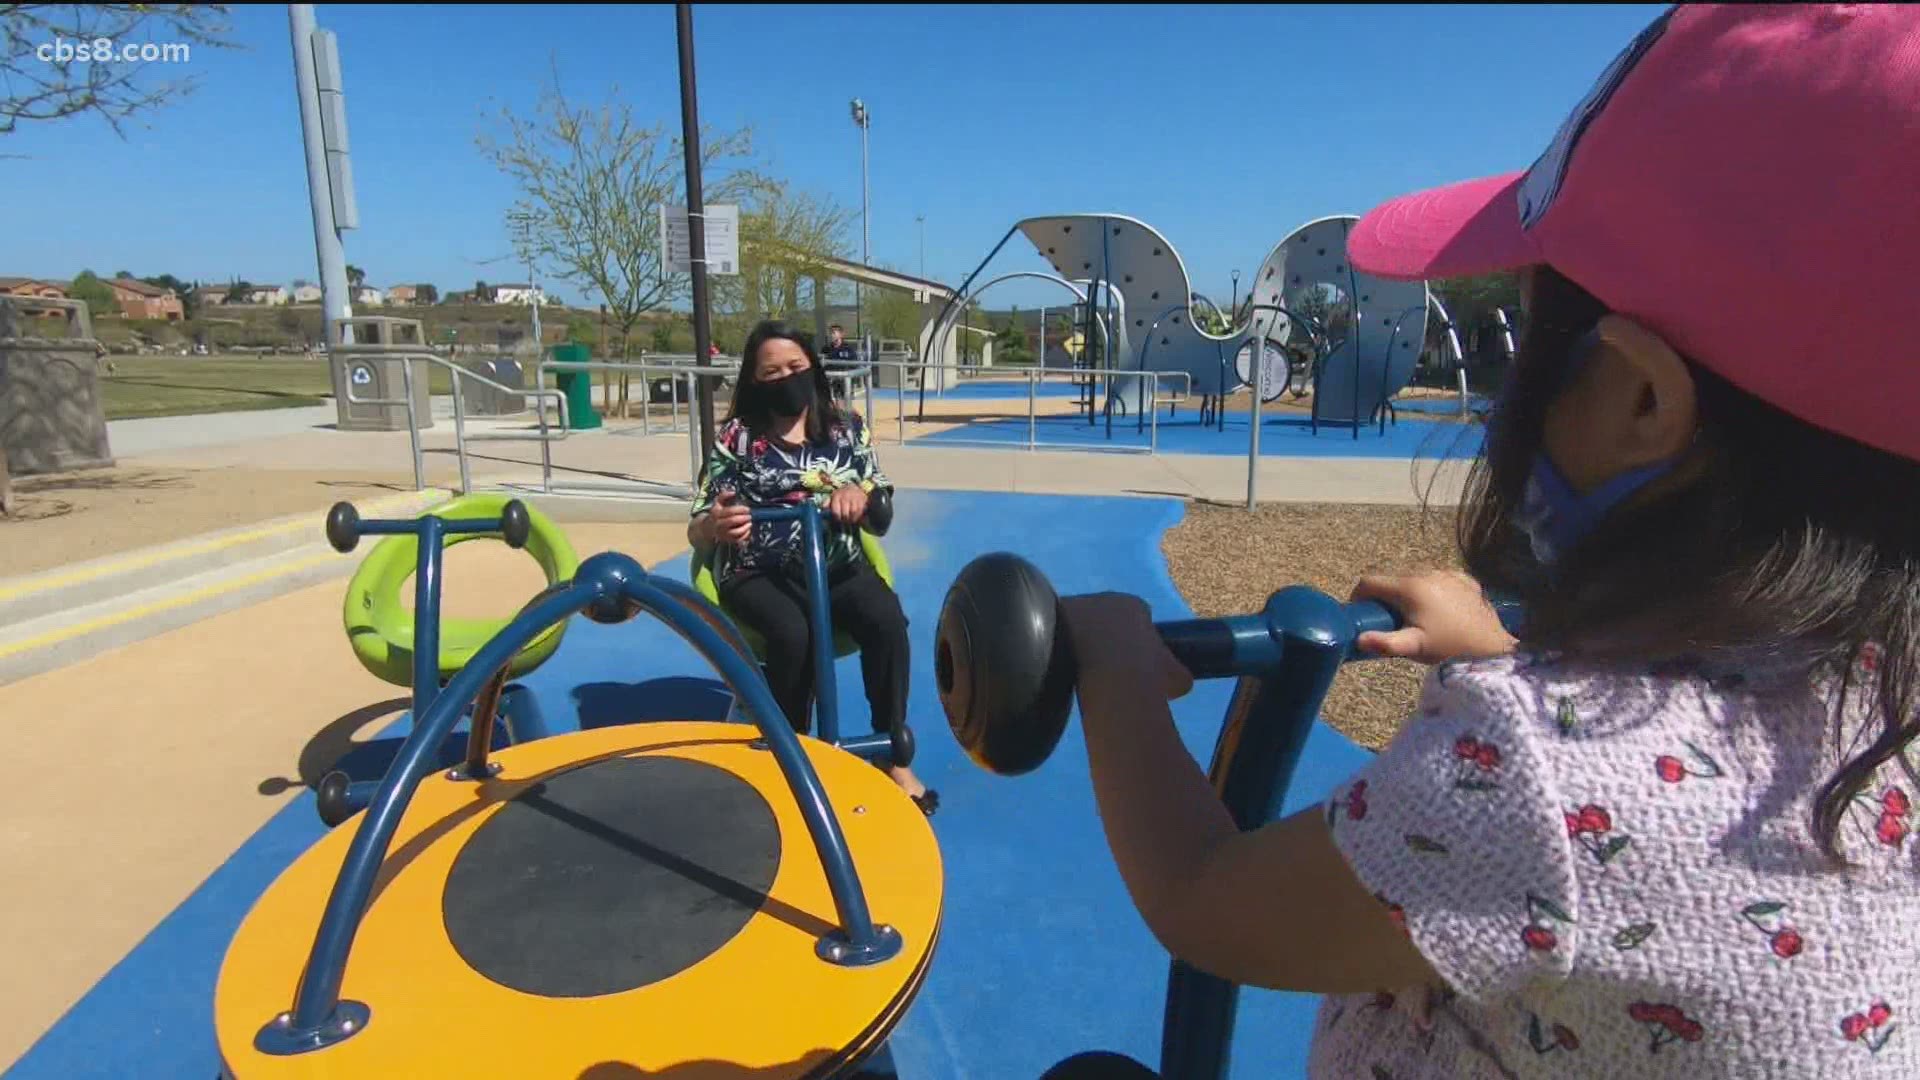 California ranks as the third least affordable state in the nation for childcare.